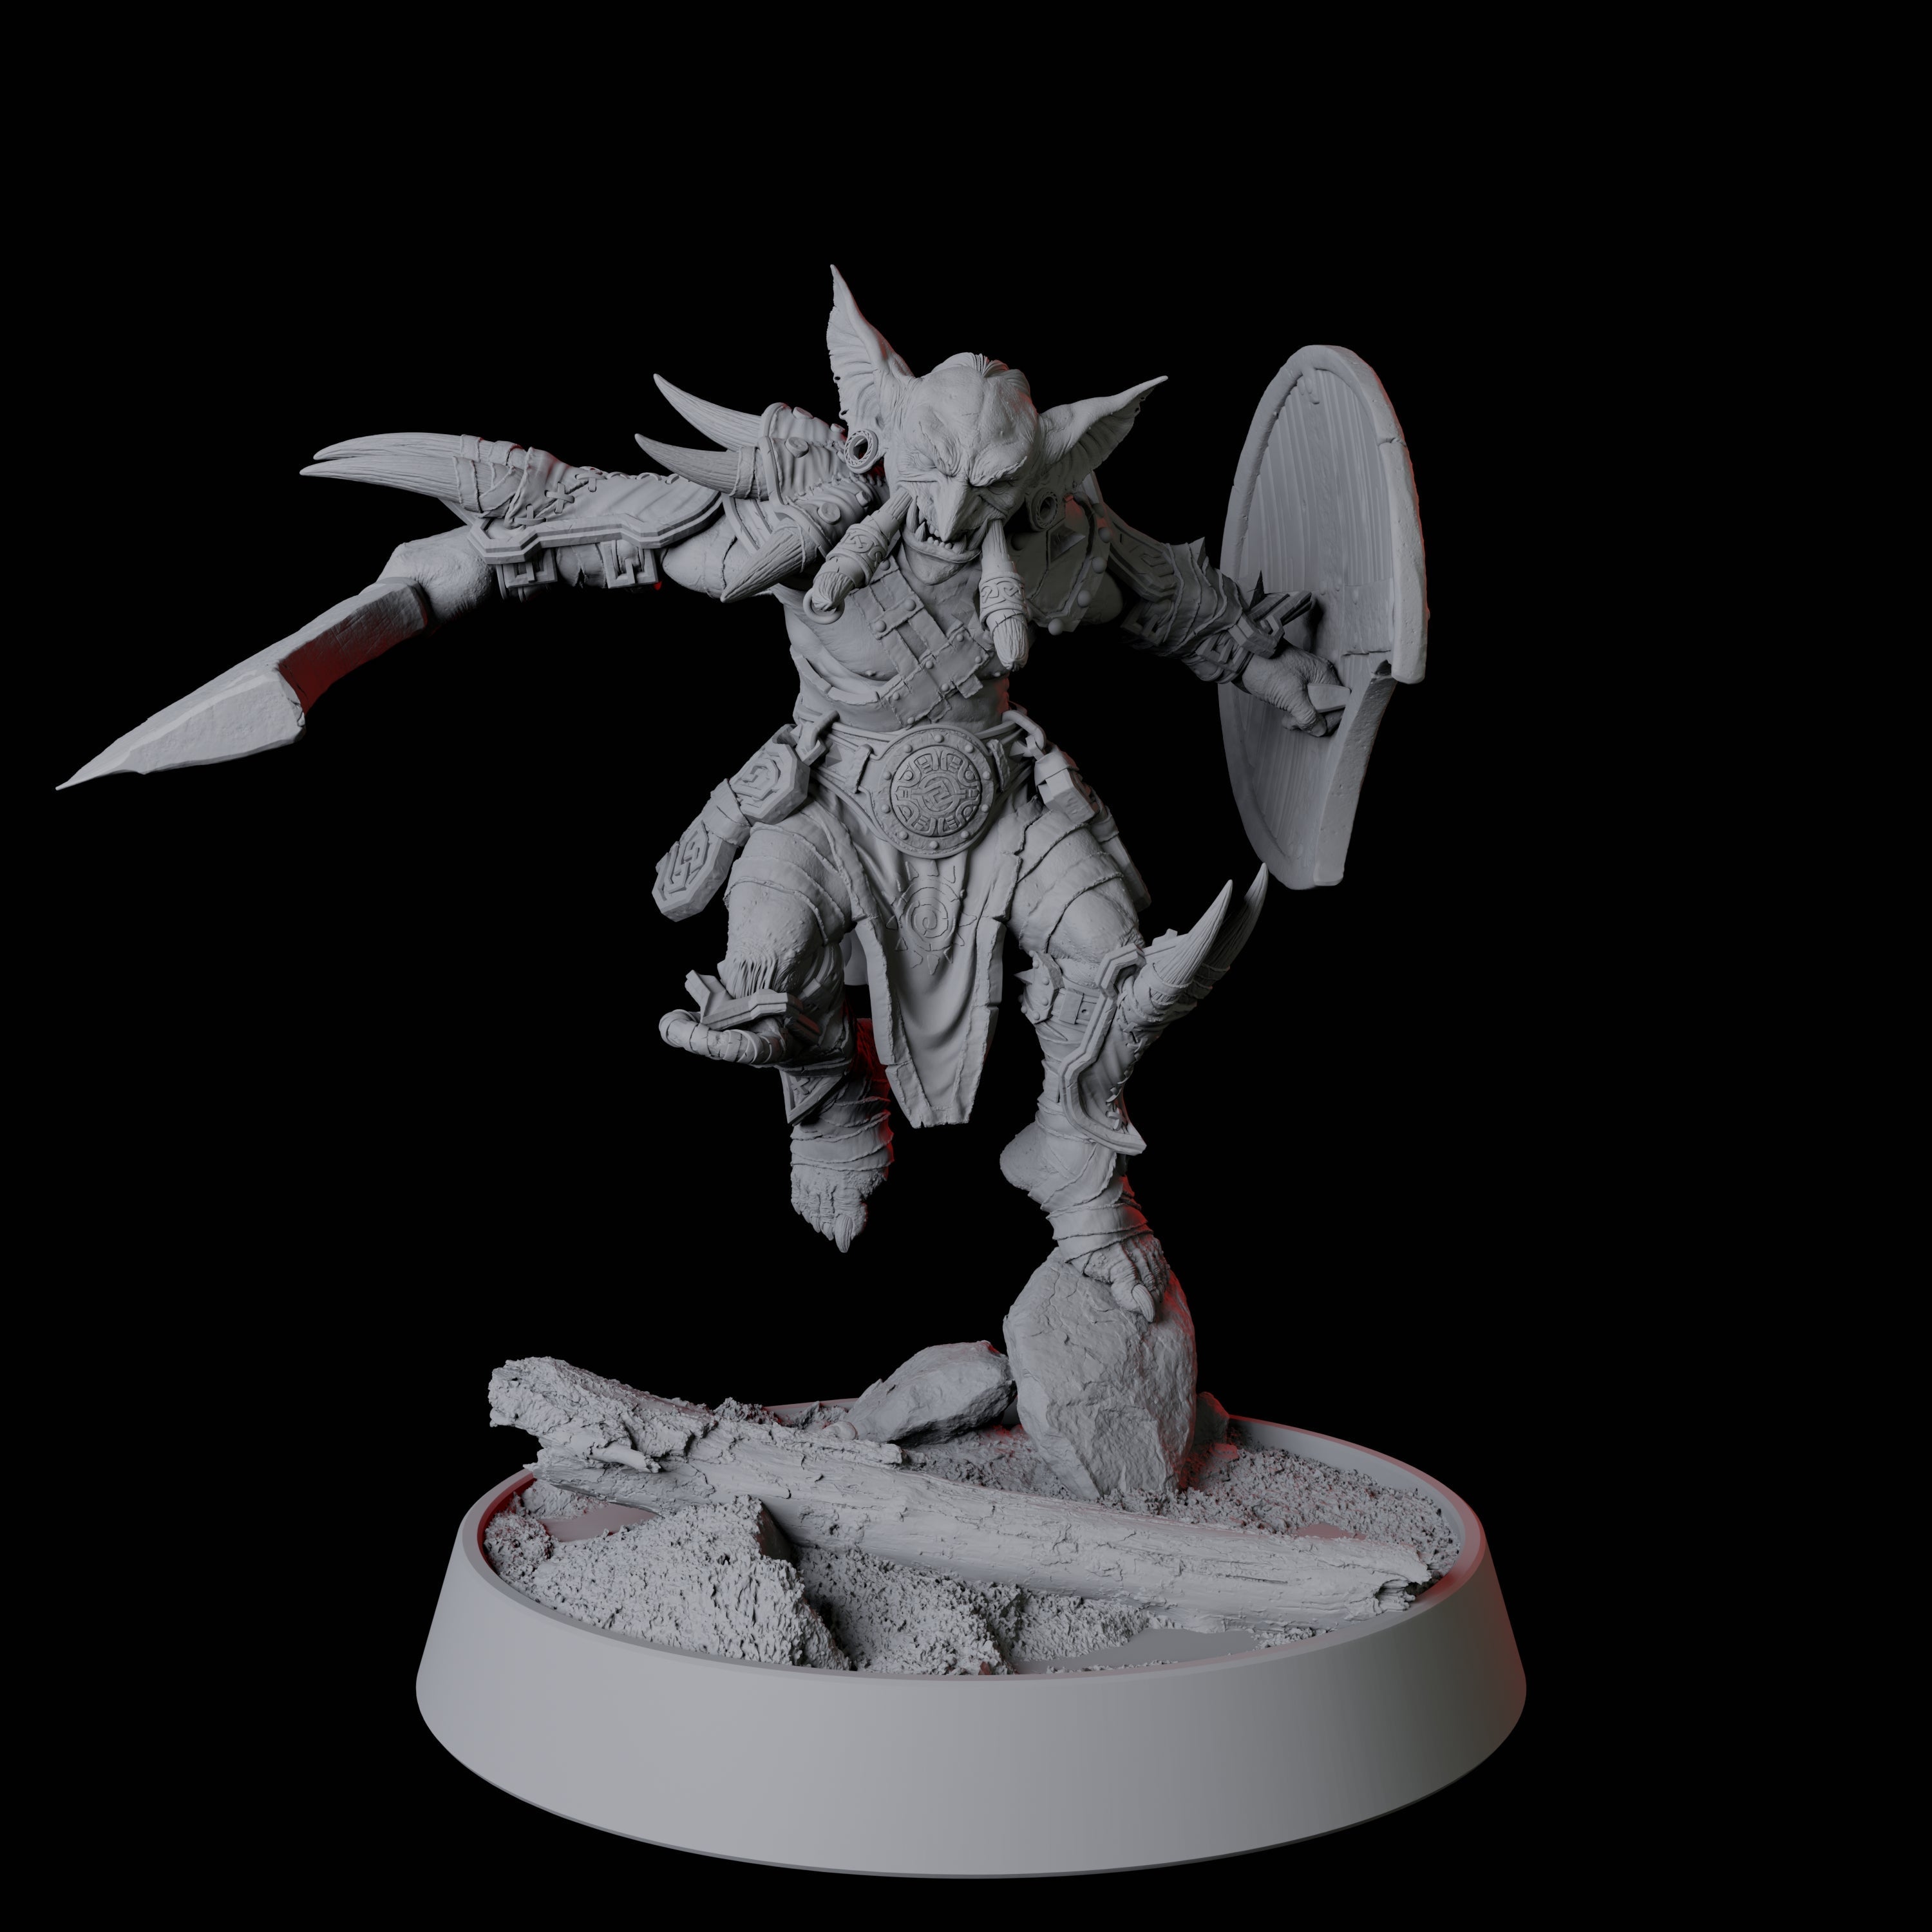 Leaping Goblin Spearman Miniature for Dungeons and Dragons